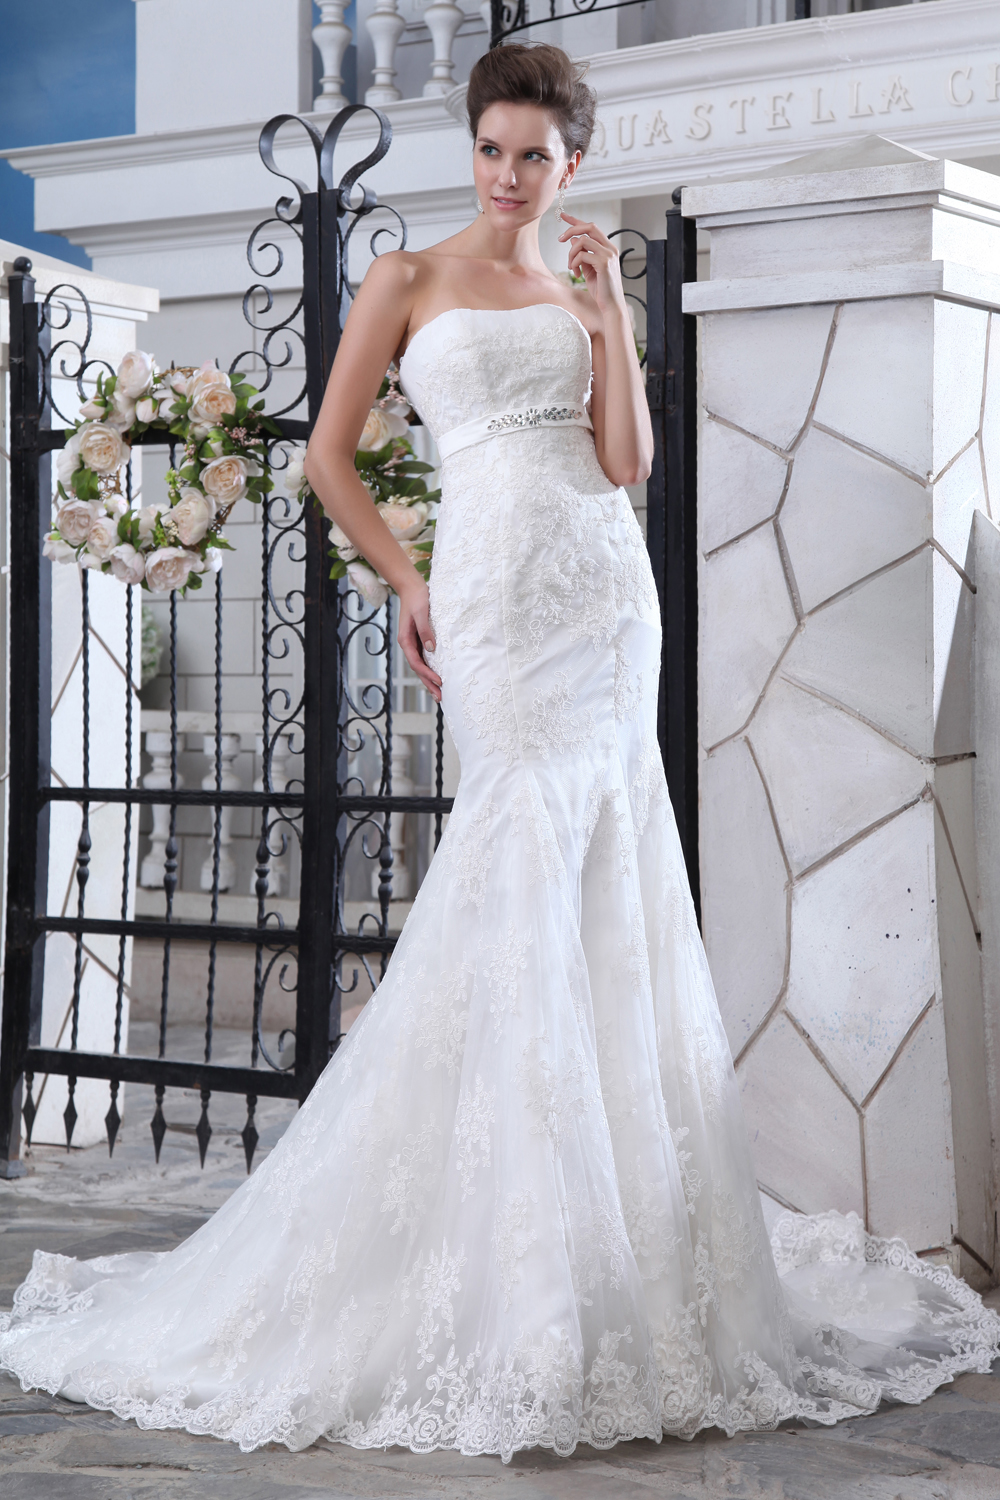 Luxurious Mermaid Strapless Court Train Tulle Lace and Belt Wedding Dress